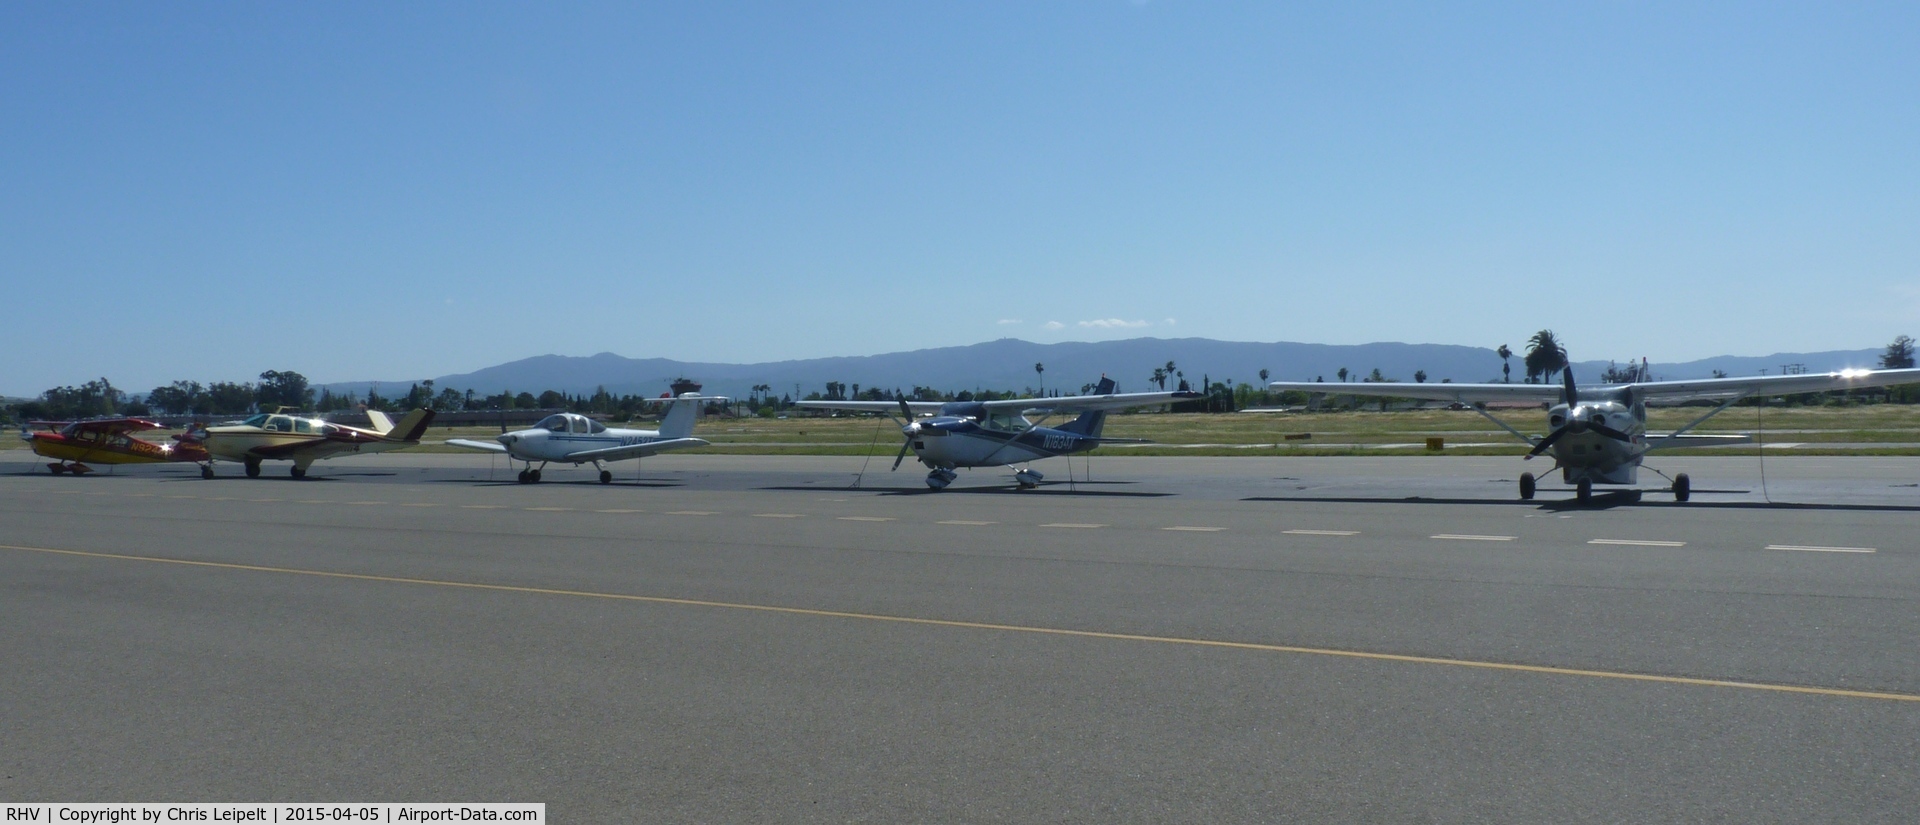 Reid-hillview Of Santa Clara County Airport (RHV) - A busy transient parking at Reid Hillview Airport, CA. 